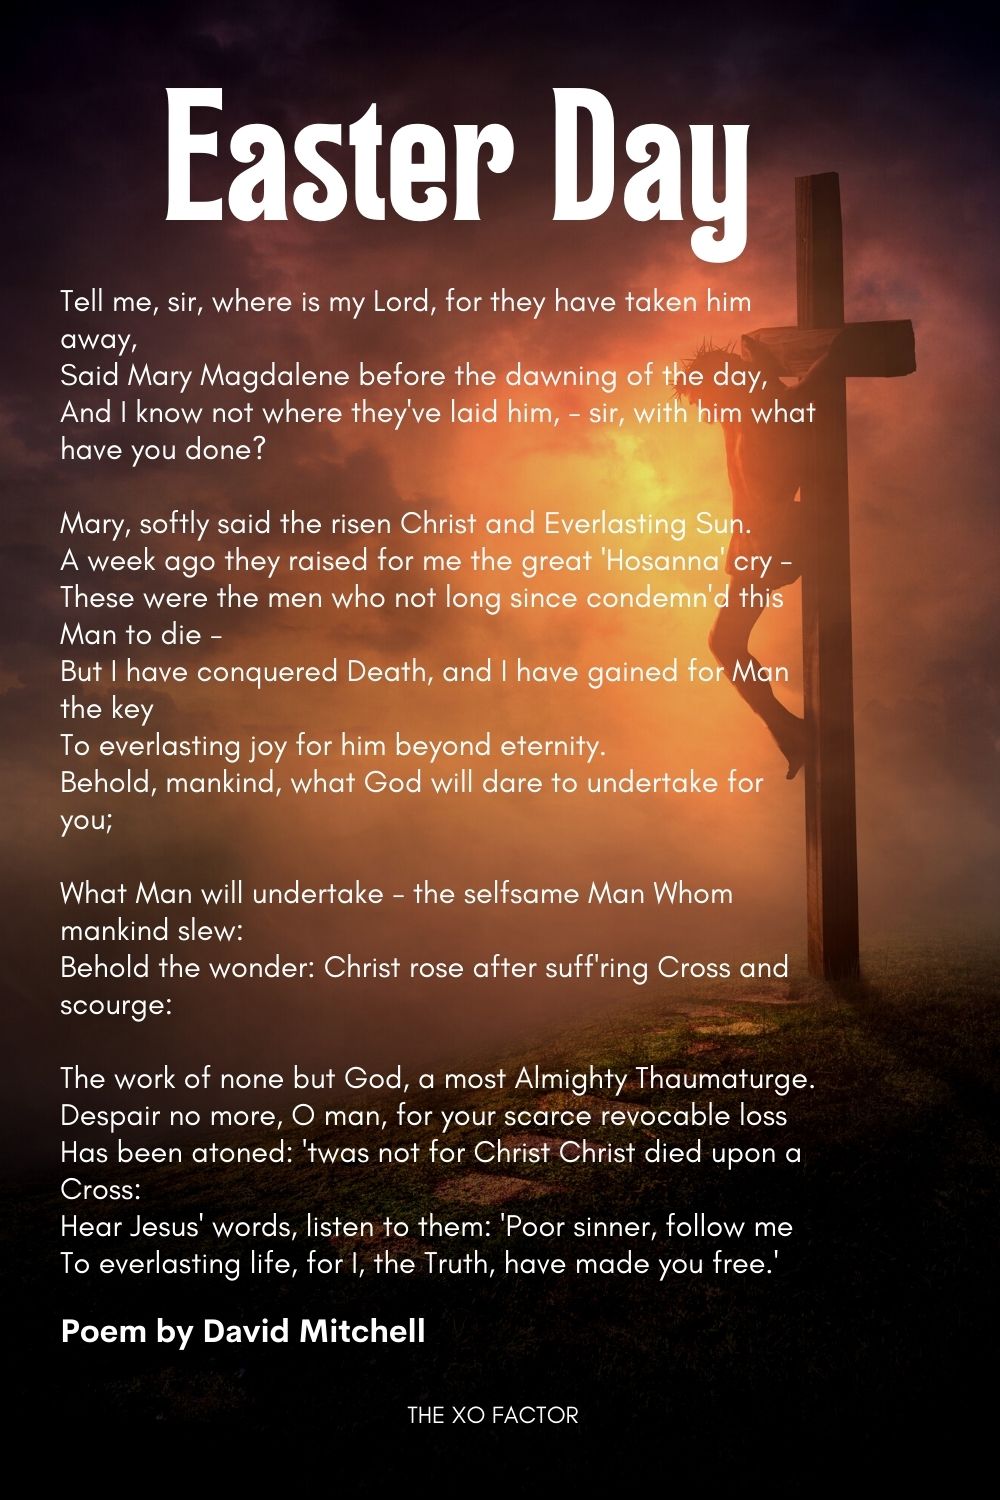 Easter Day Poem by David Mitchell